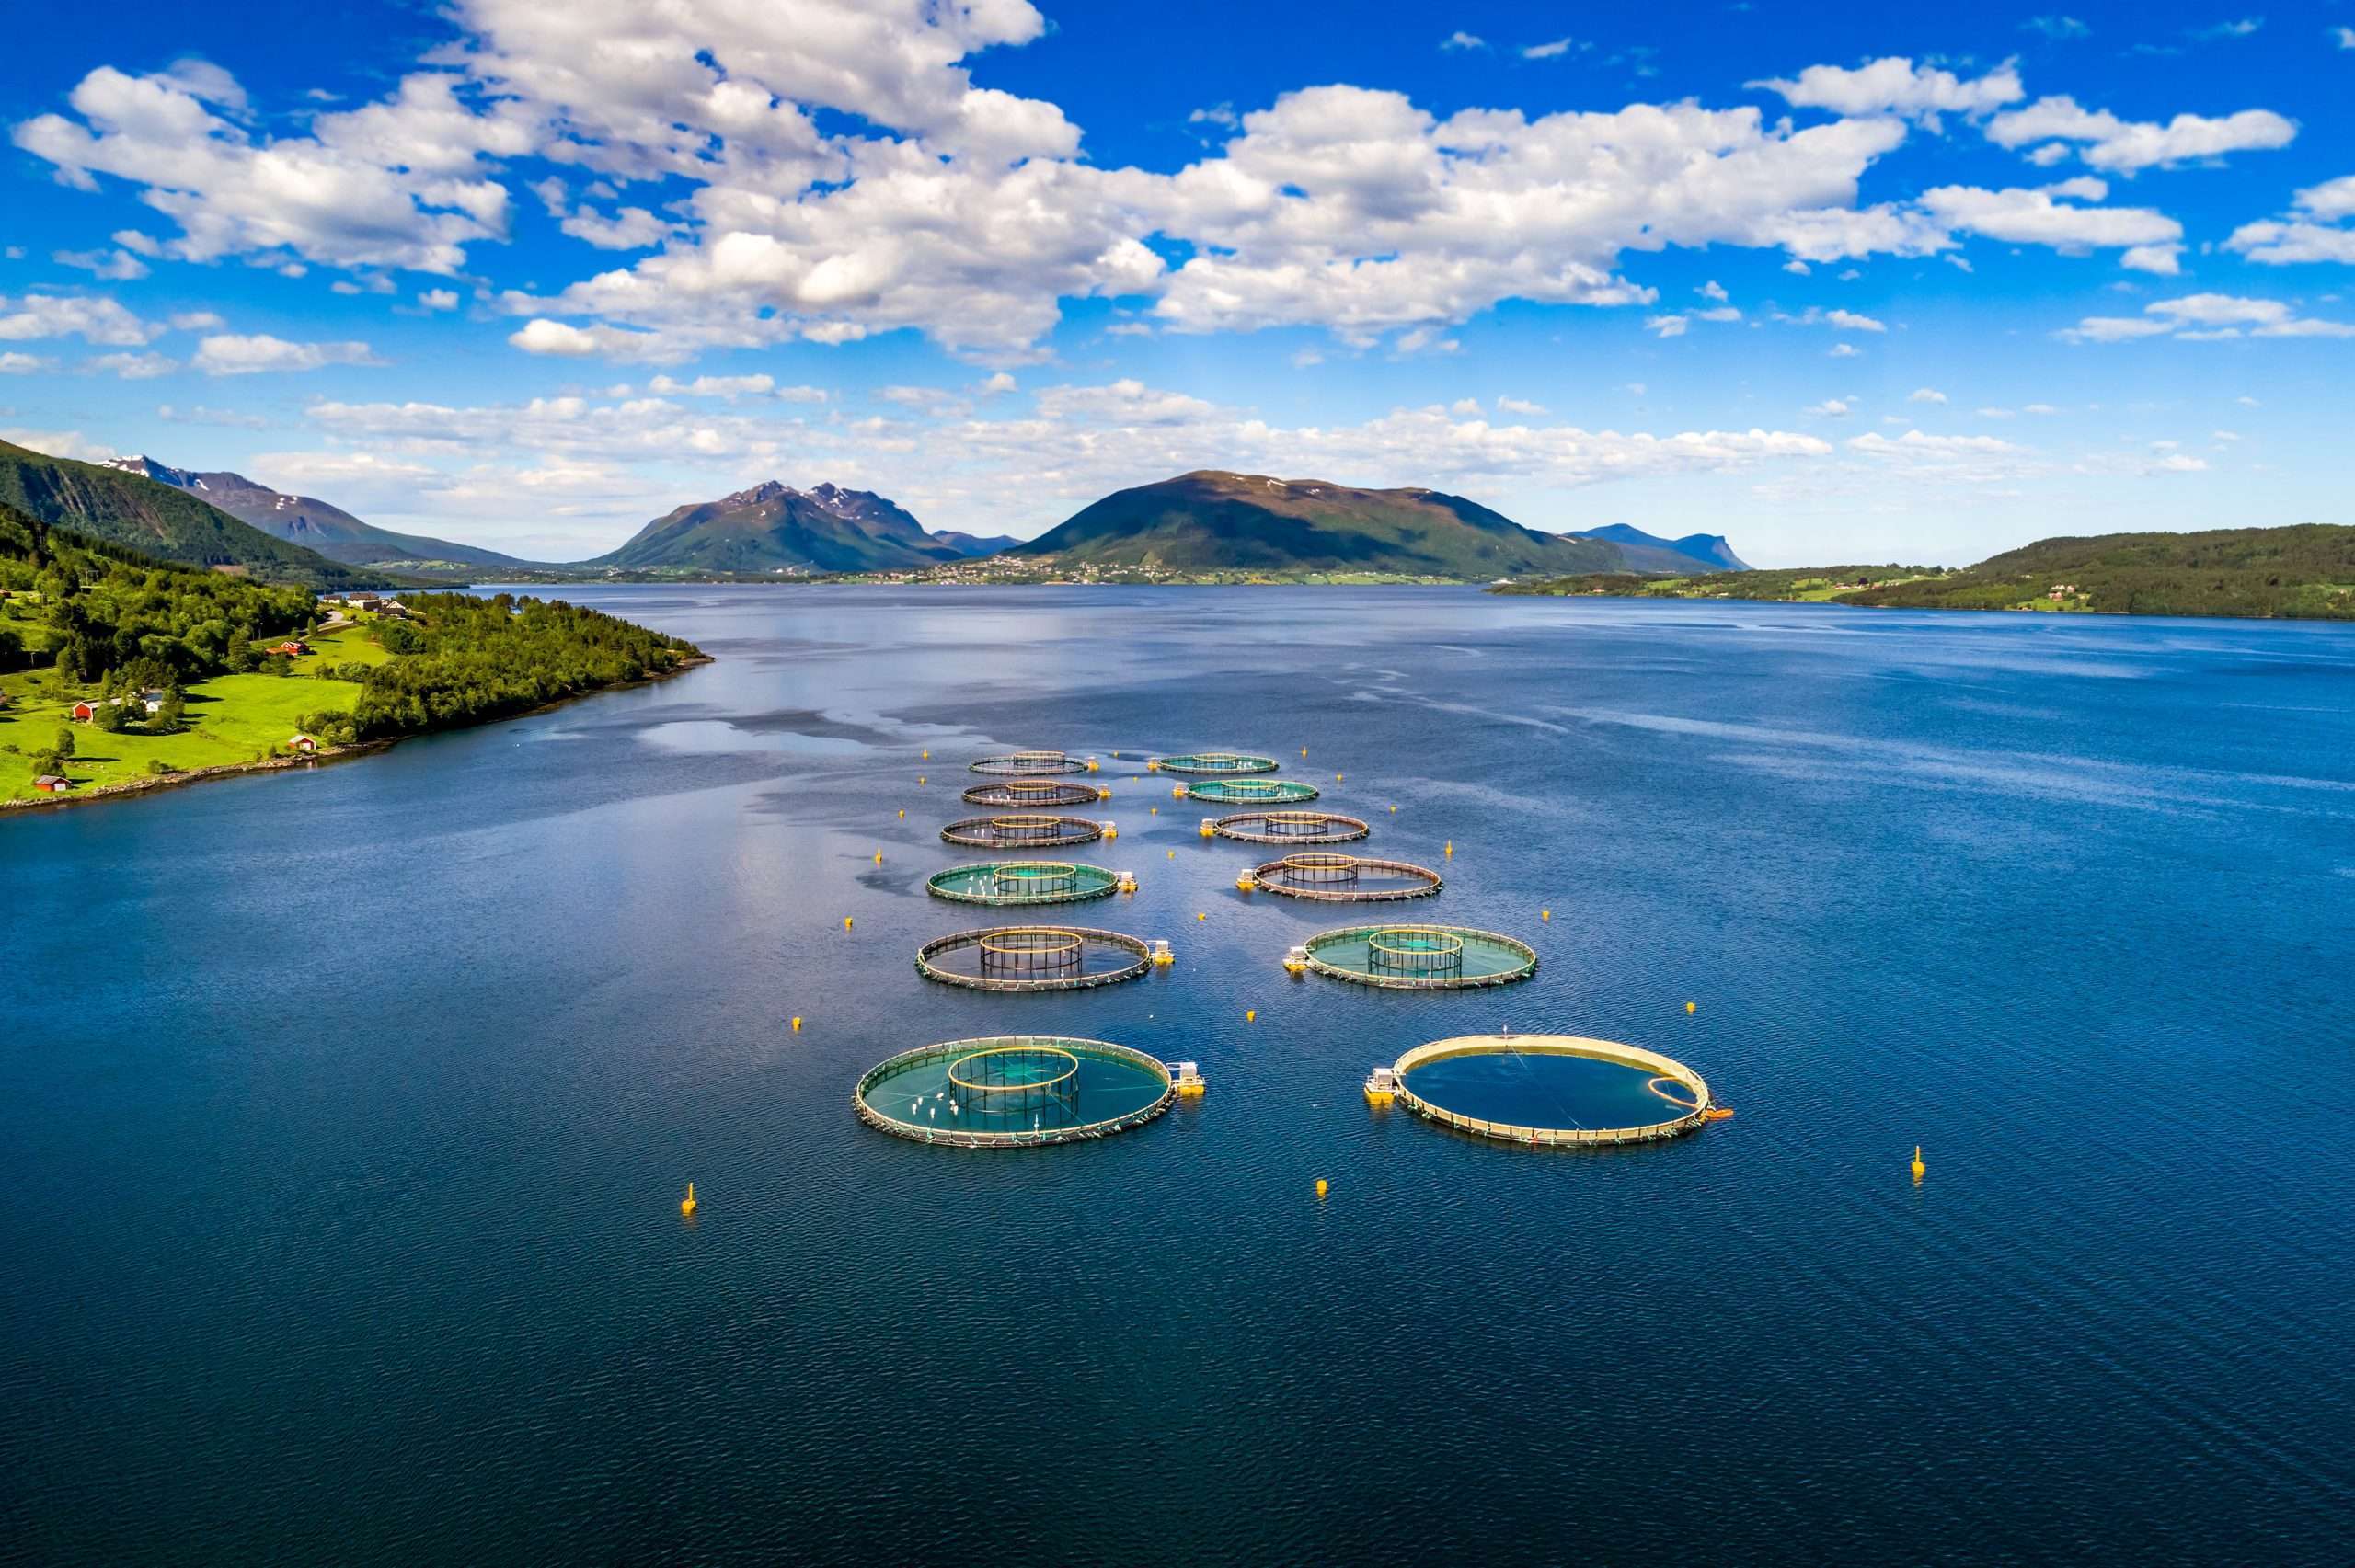 Salmon farm located in Norway. Credit By Andrey Armyagov